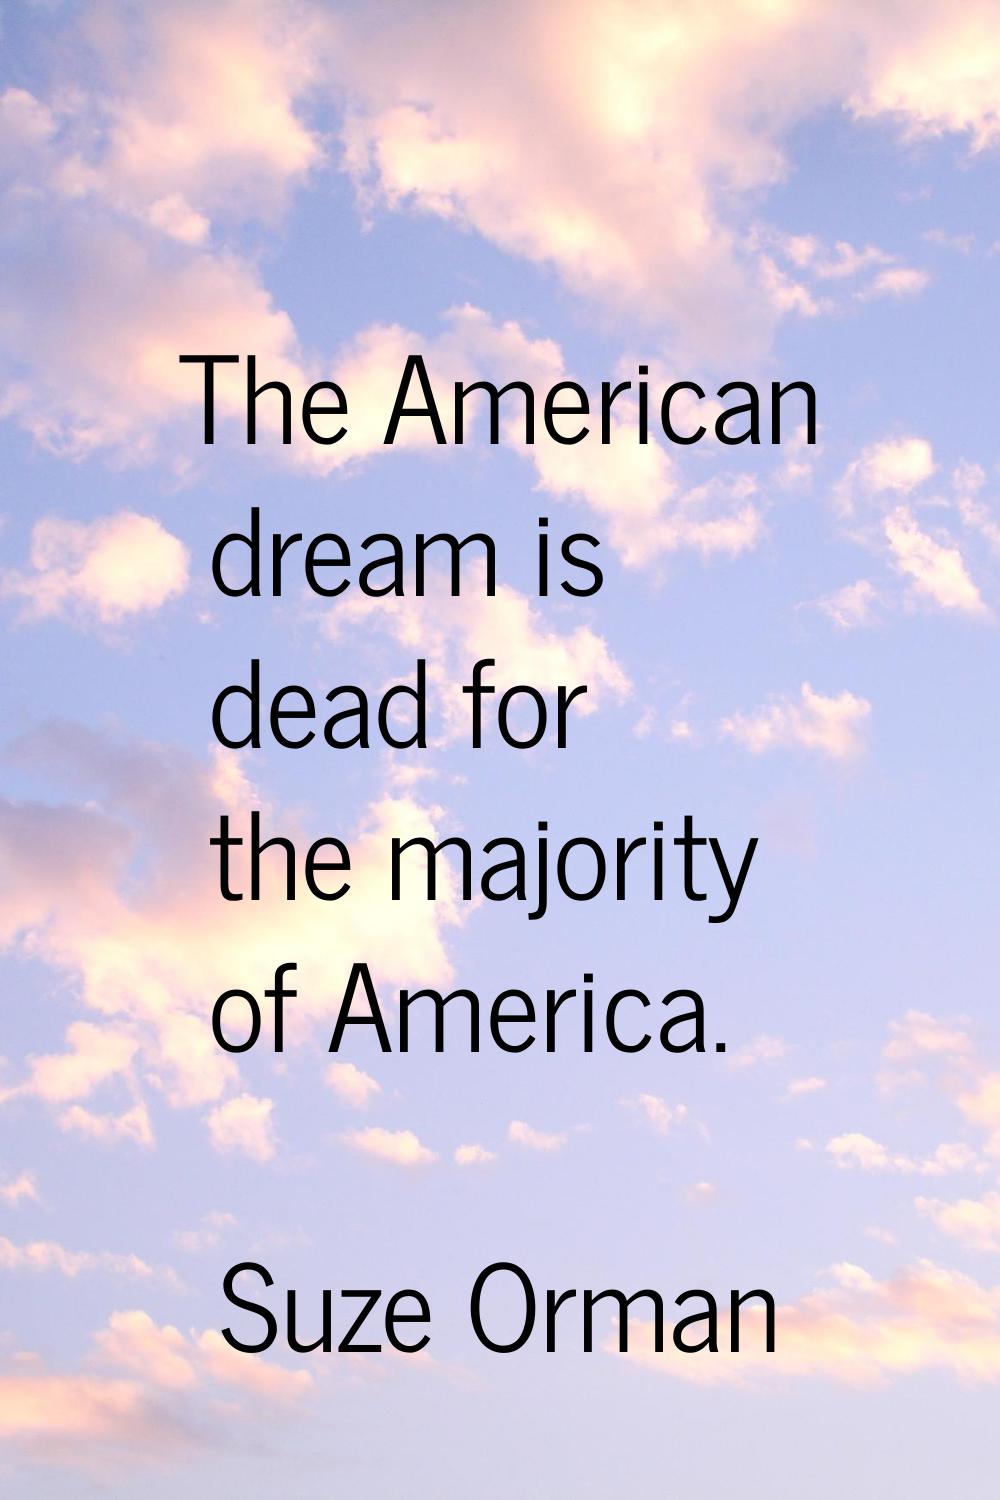 The American dream is dead for the majority of America.